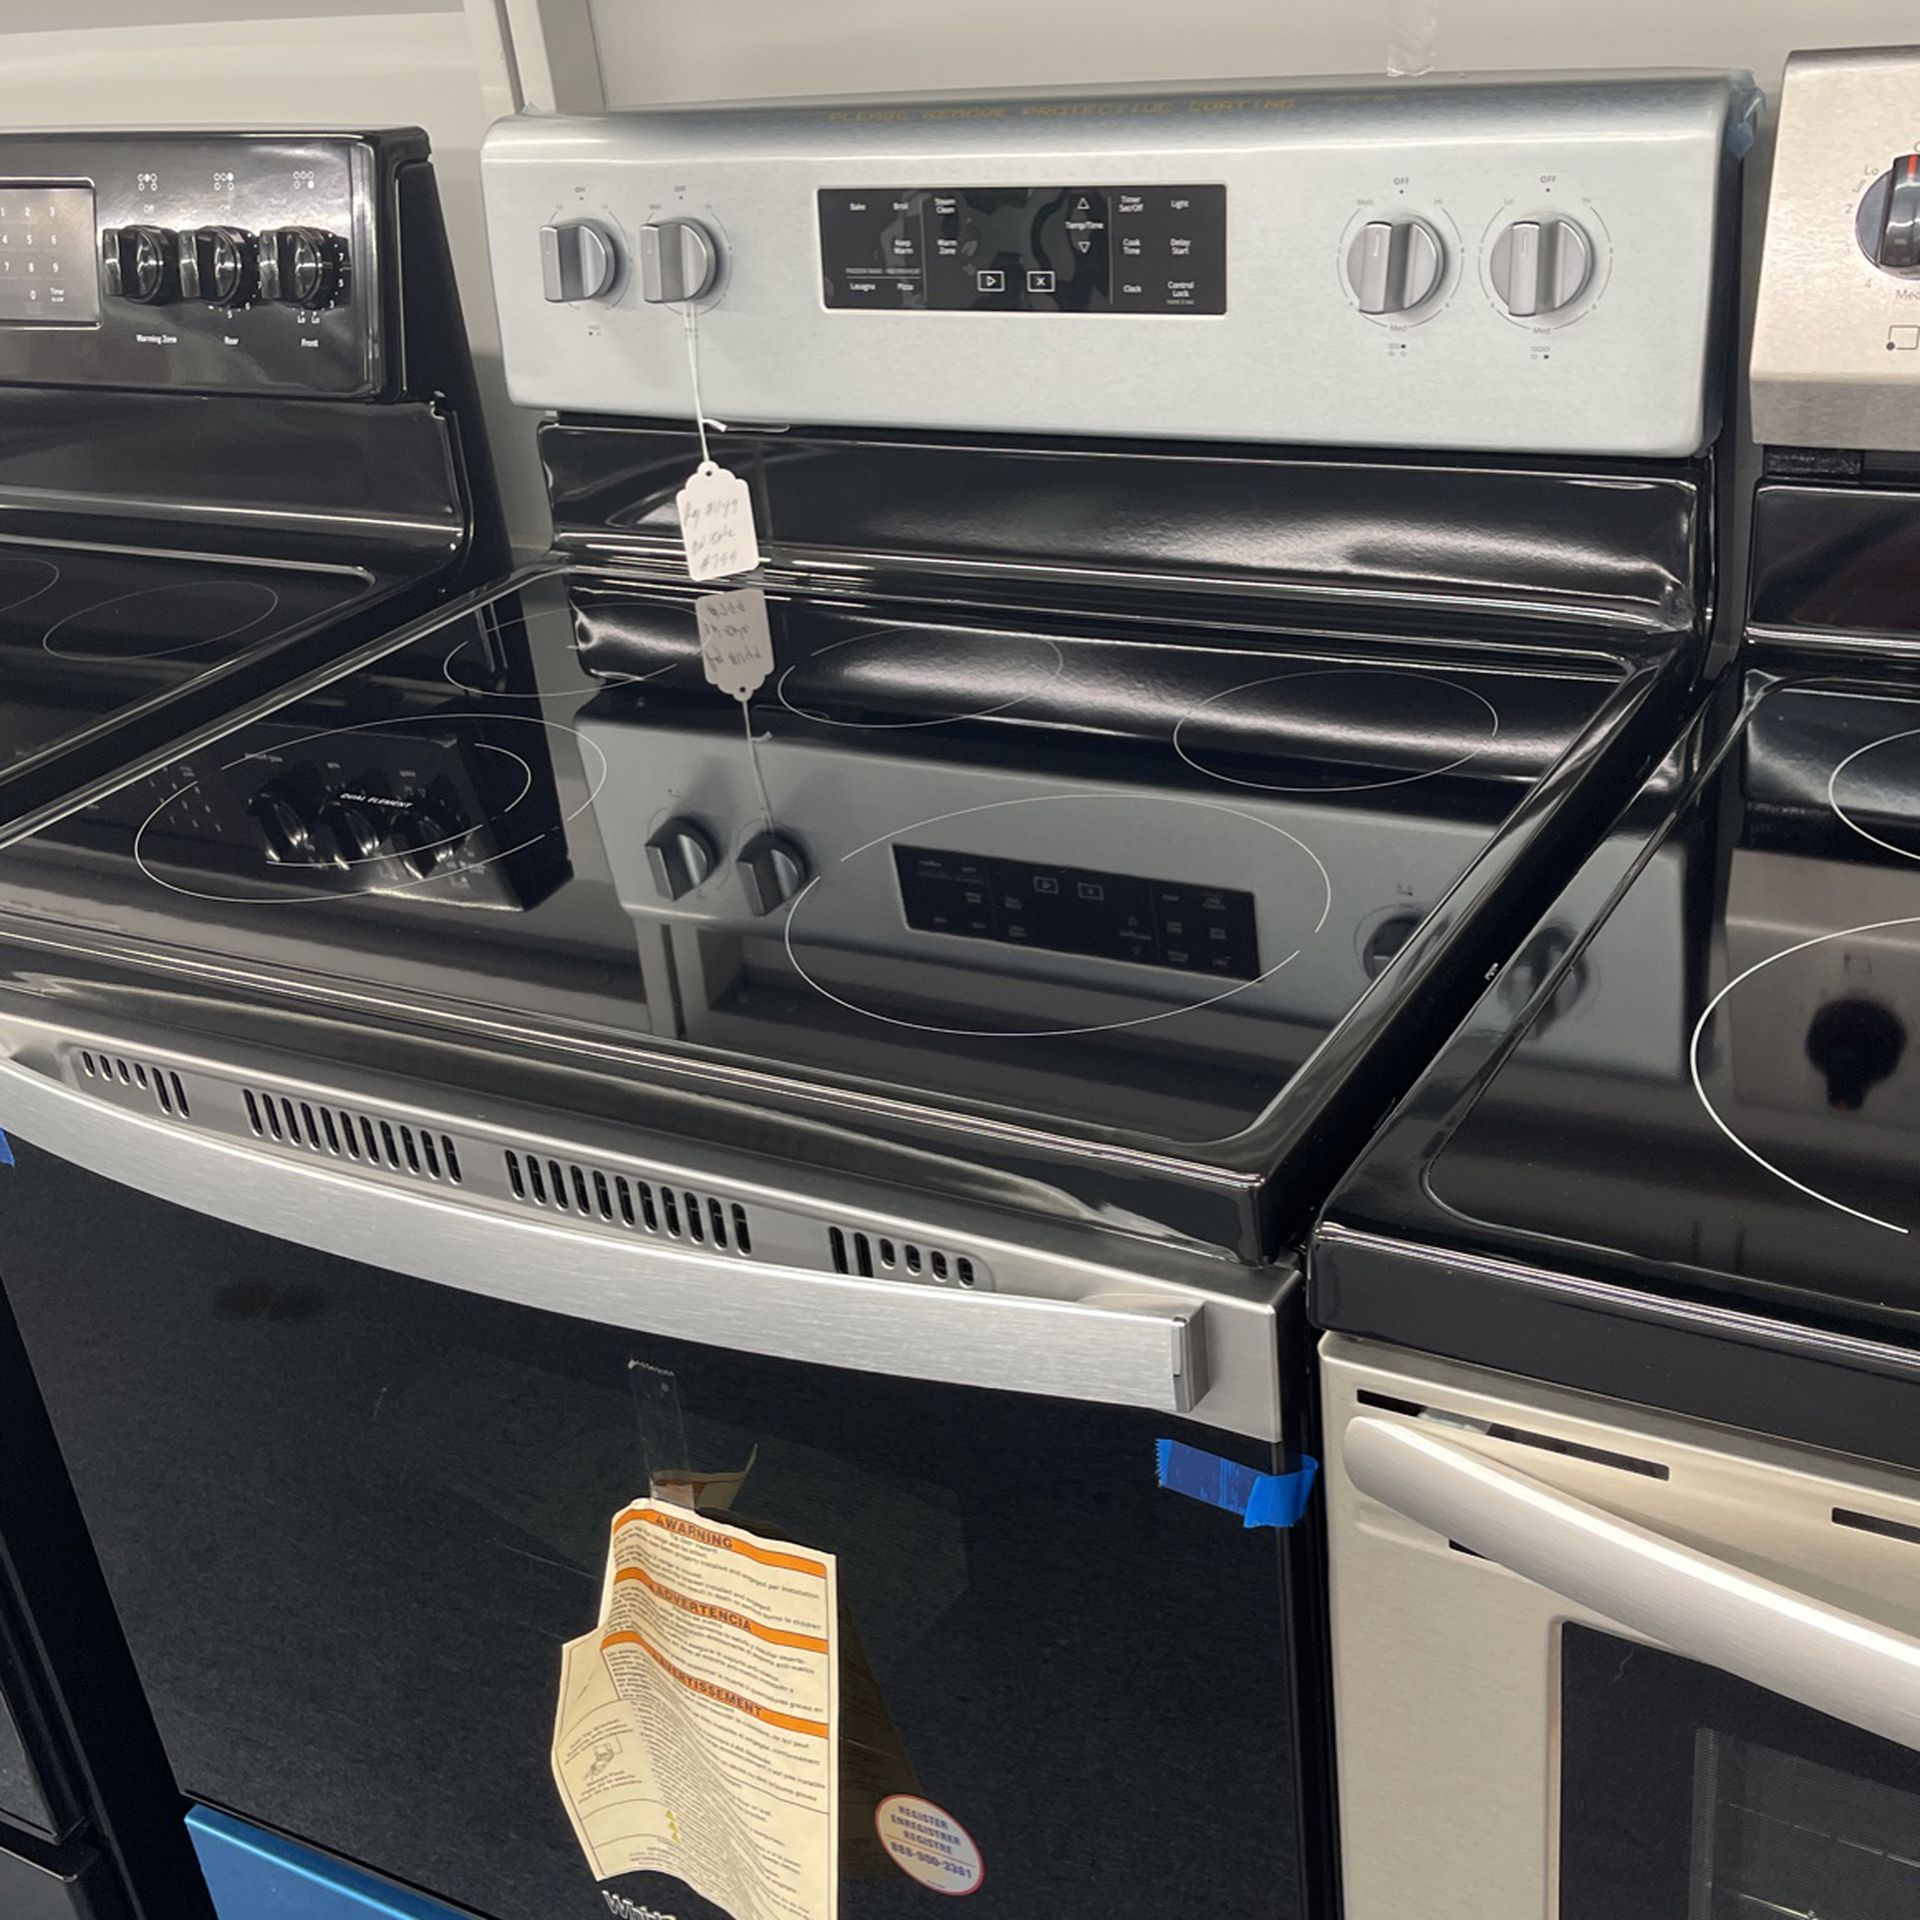 New Scratch And Dent Whirlpool 5 Burner Glass Top Stainless Steel Range. 1 Year Warranty